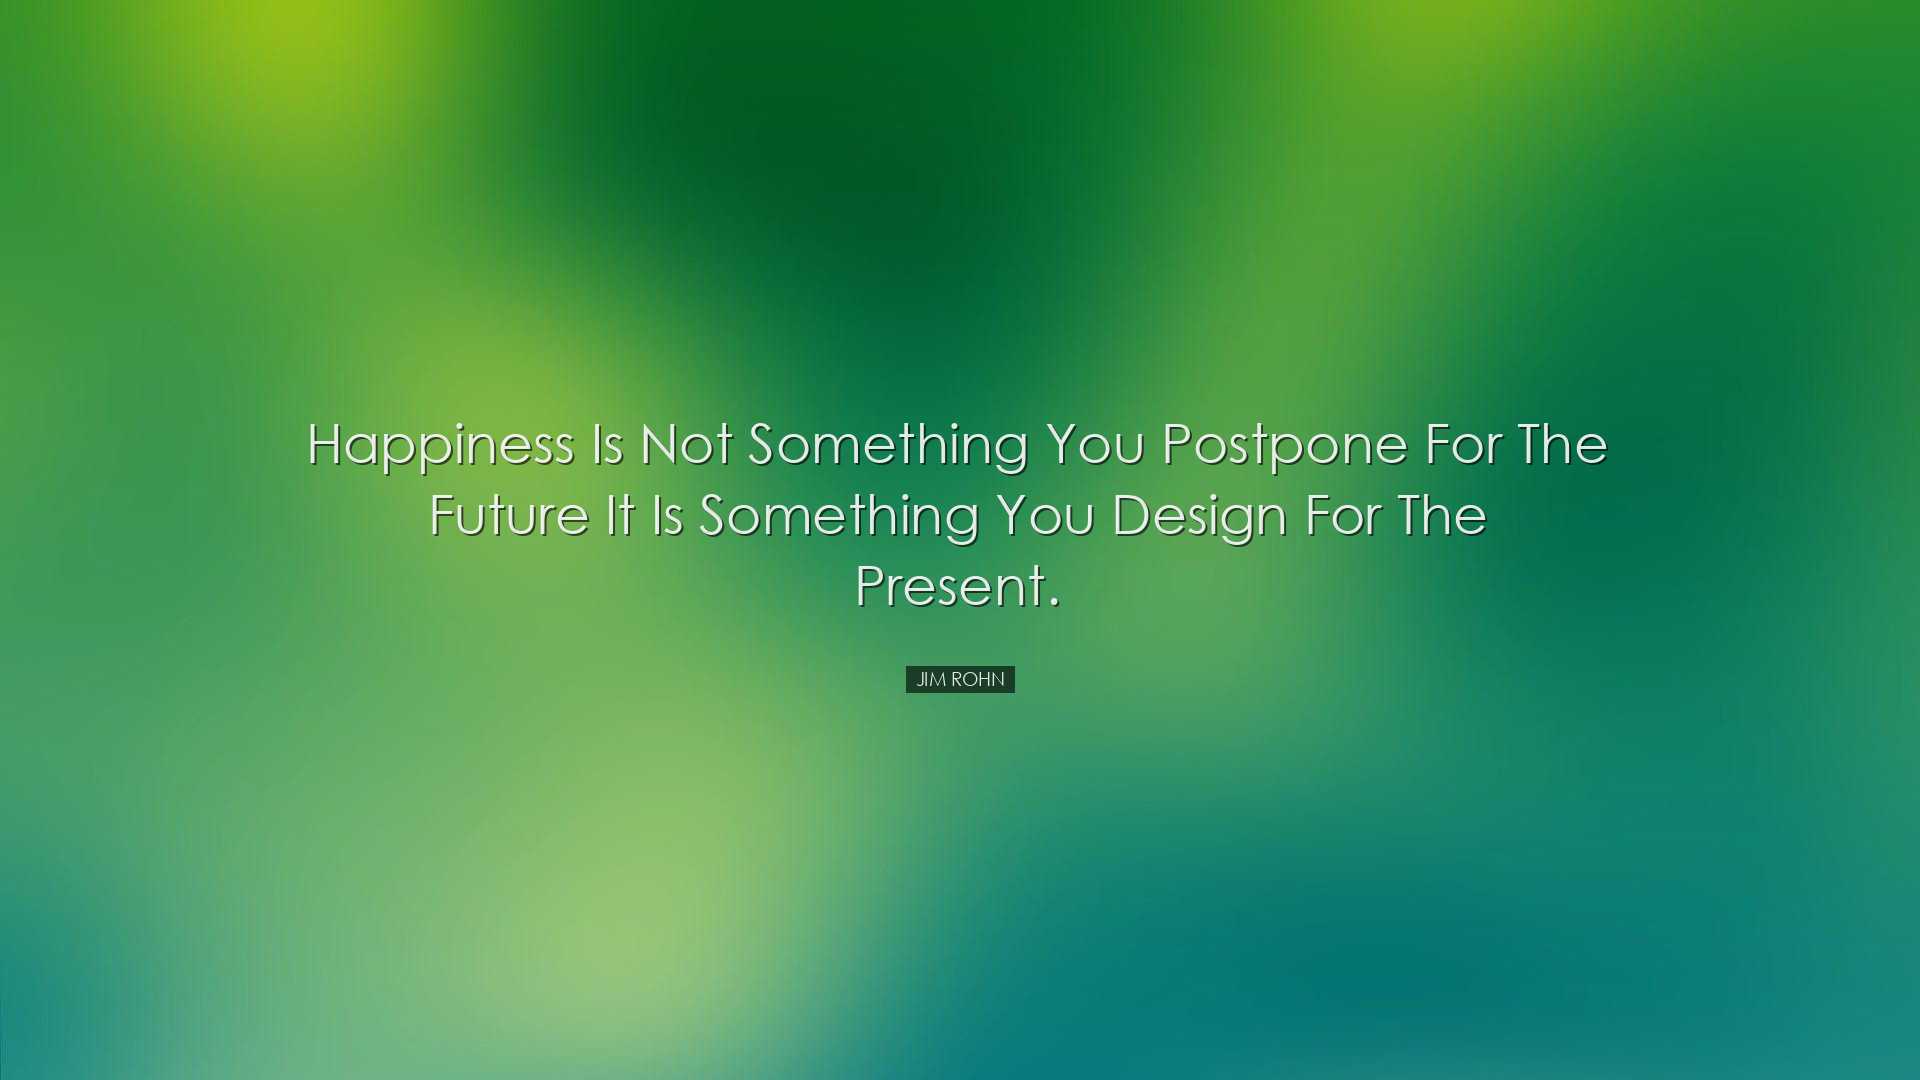 Happiness is not something you postpone for the future it is somet